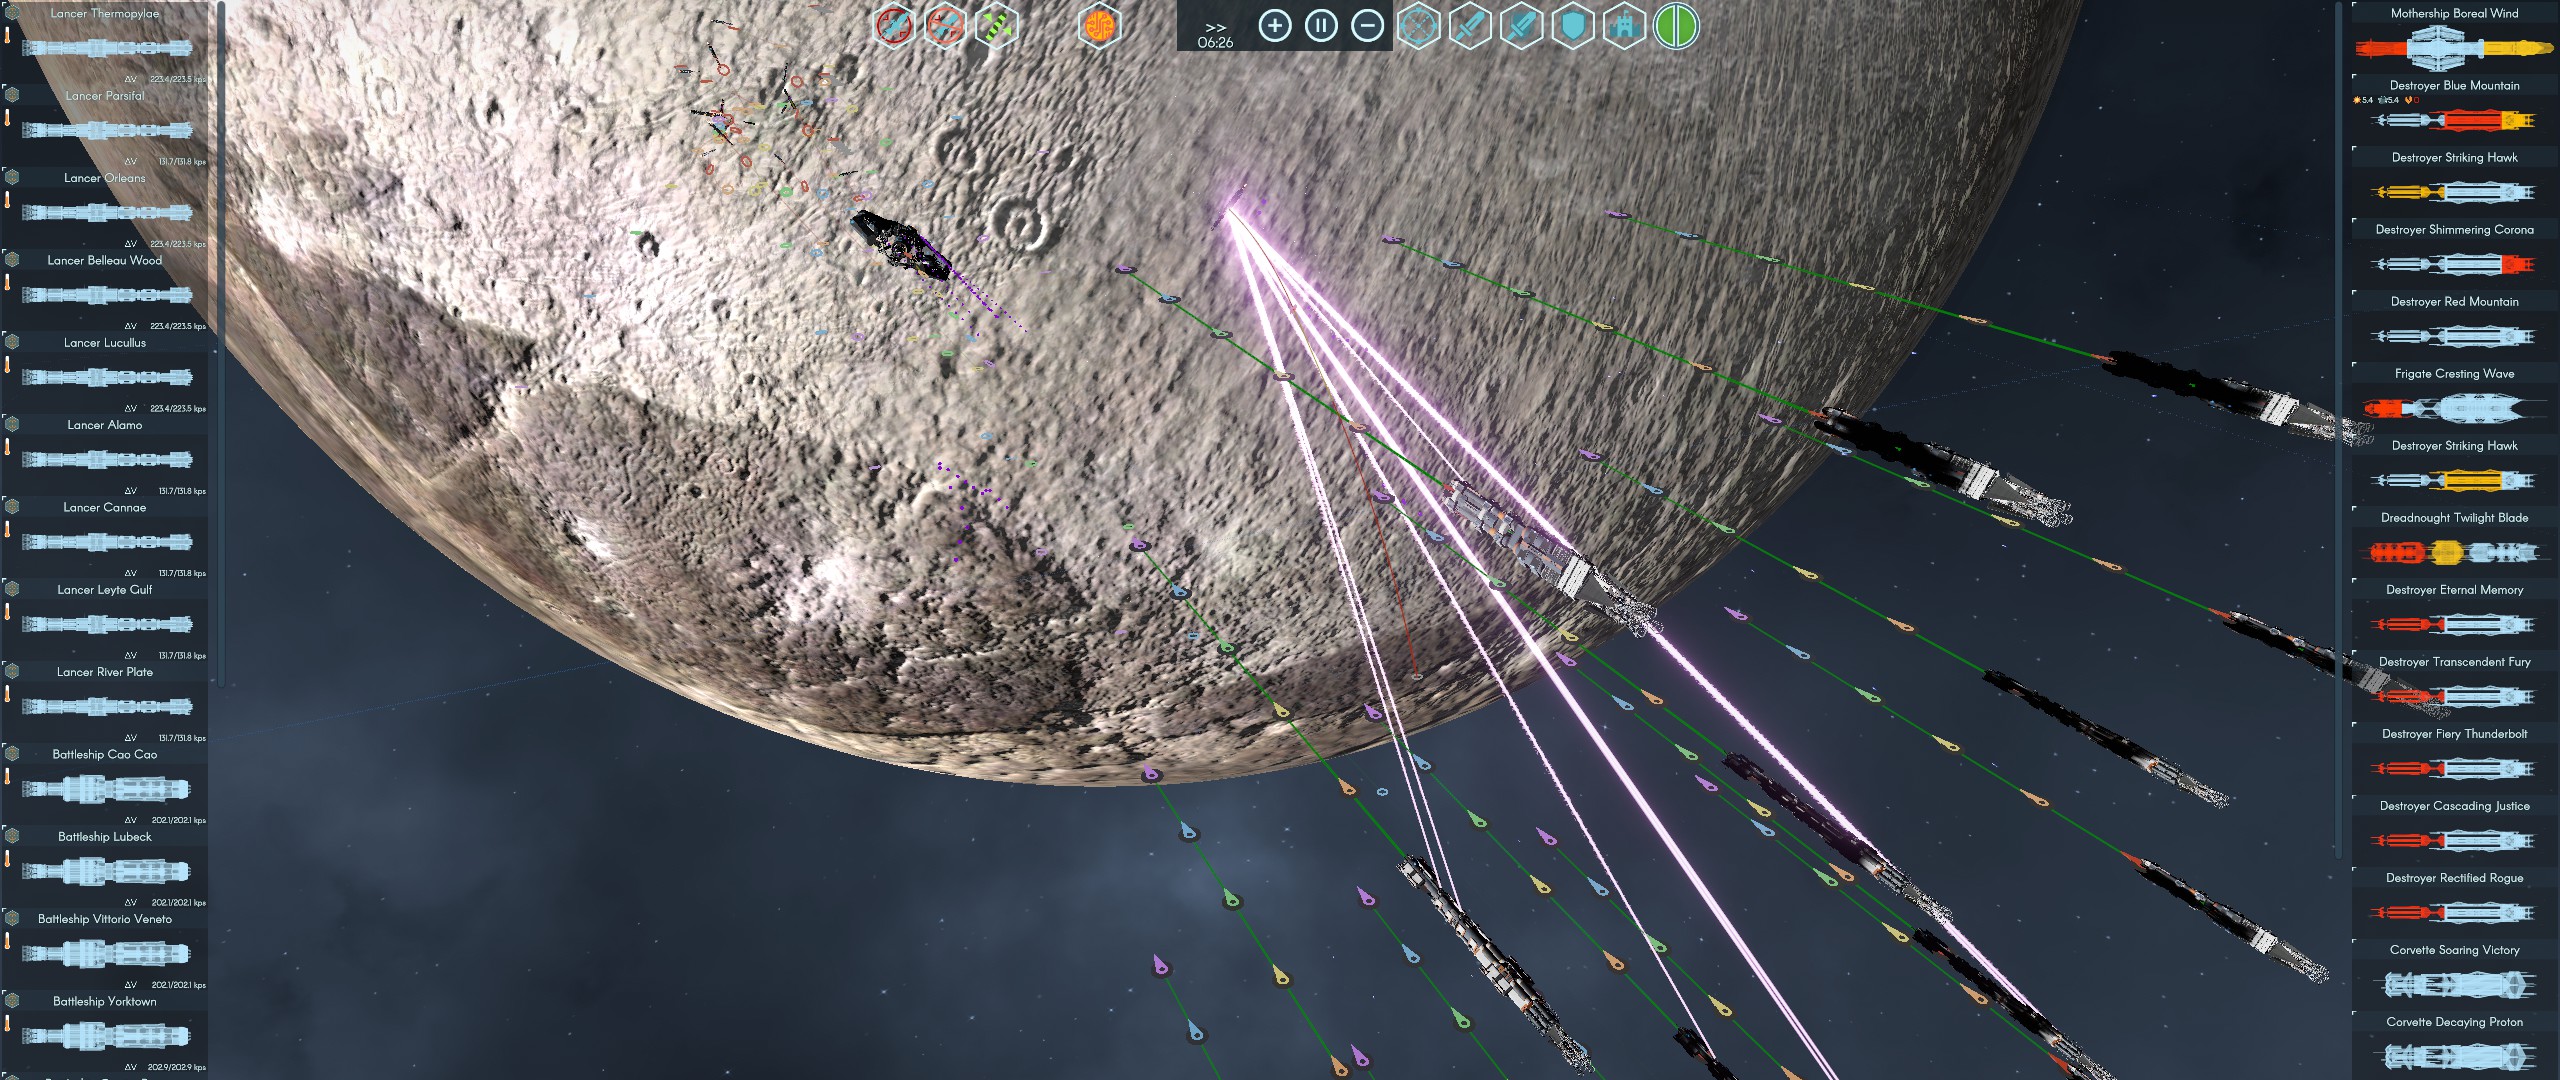 Steam players are loving this free RTS that's like Anno in space